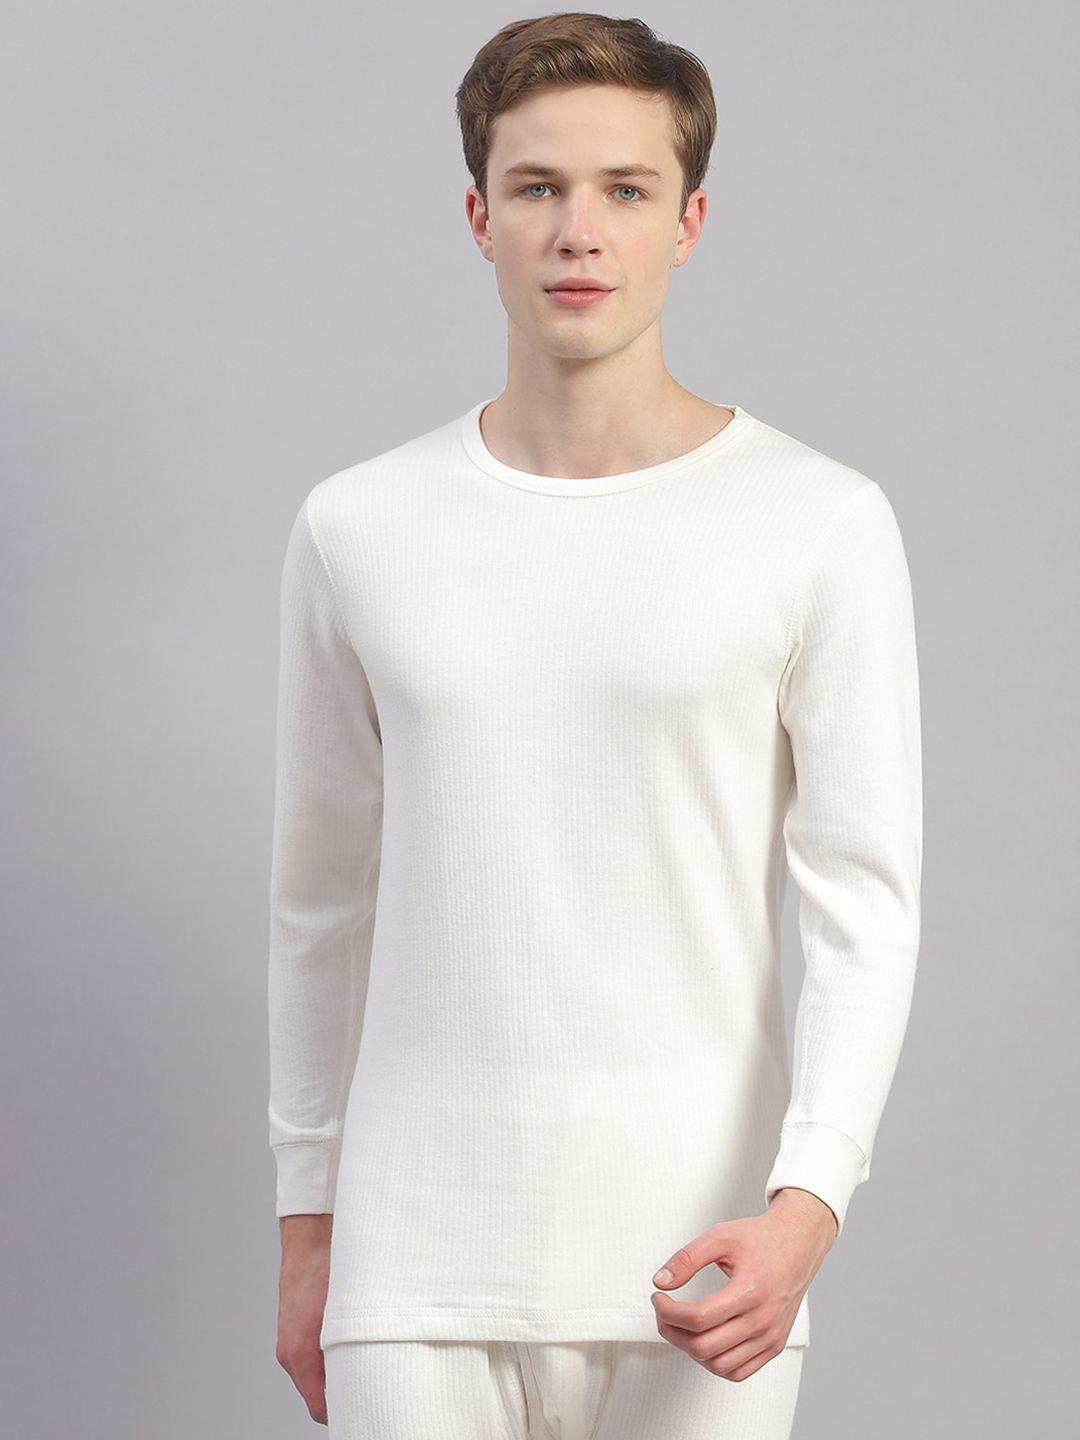 monte carlo cotton thermal top